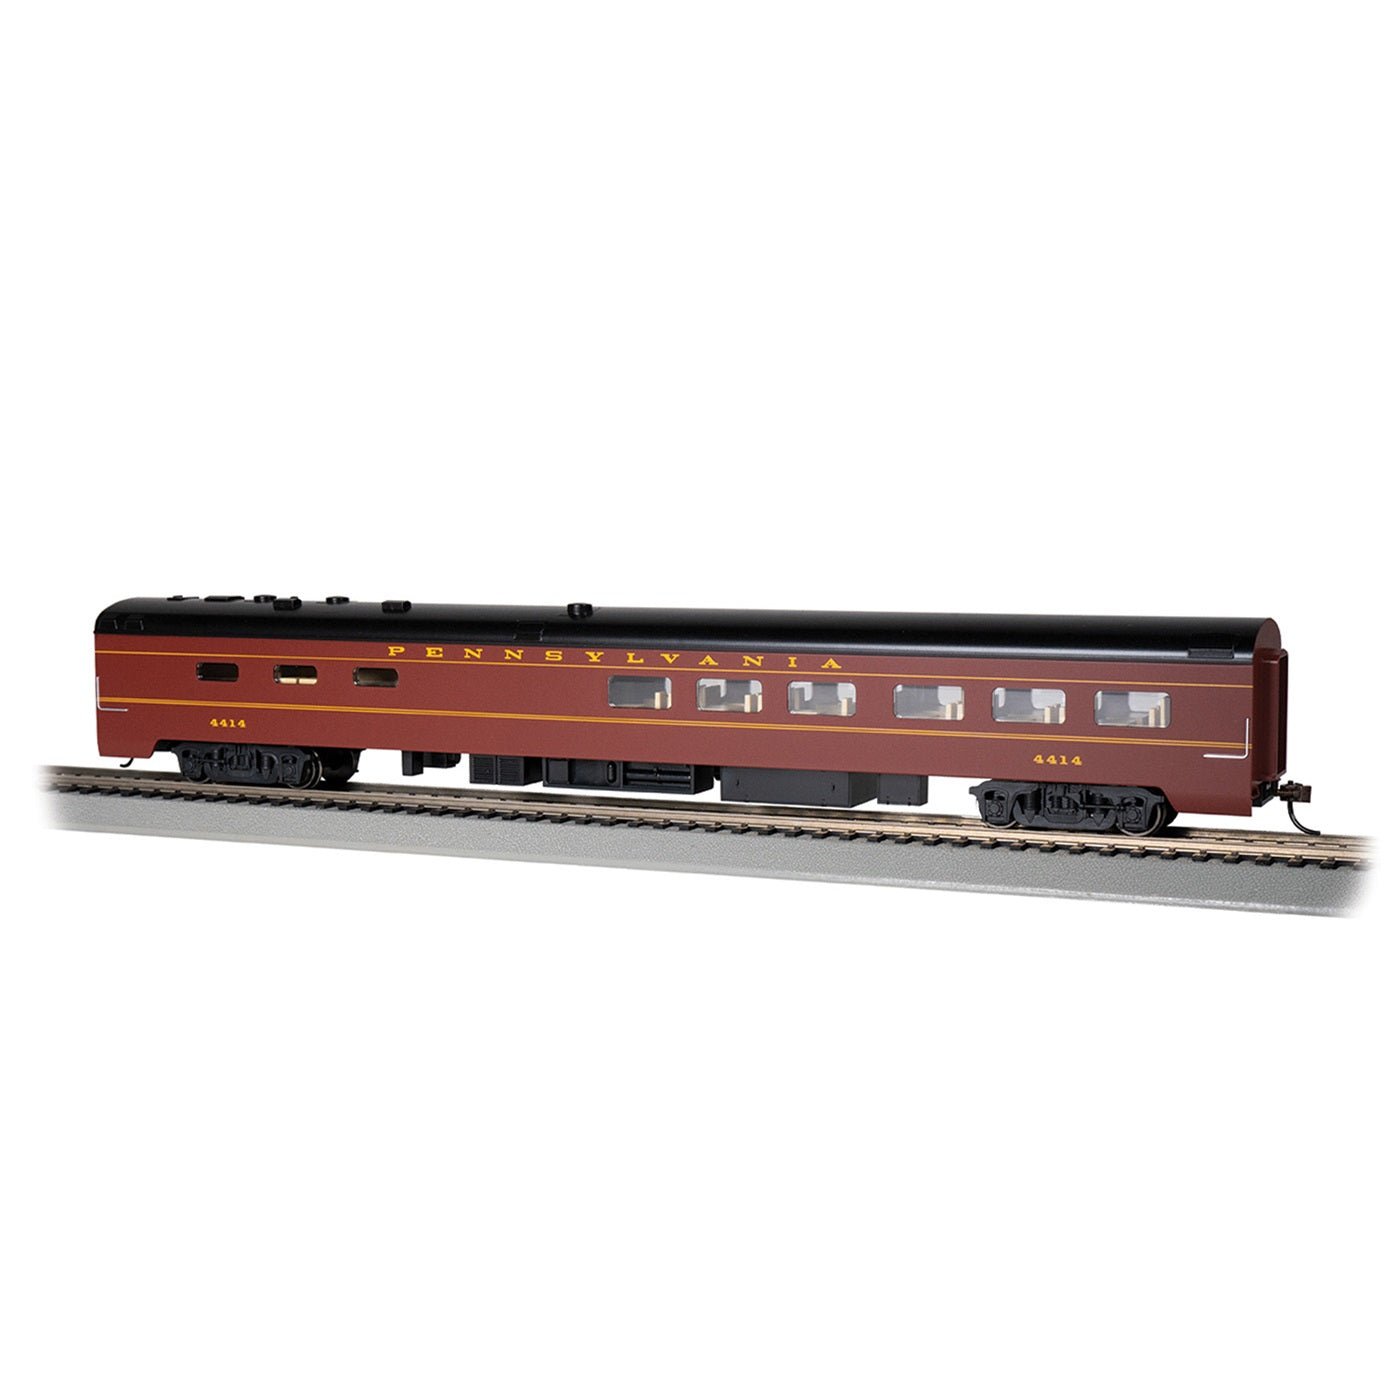 Bachmann 85' Smooth - Side Dining Car with Lighted Interior PRR #4414, HO Scale